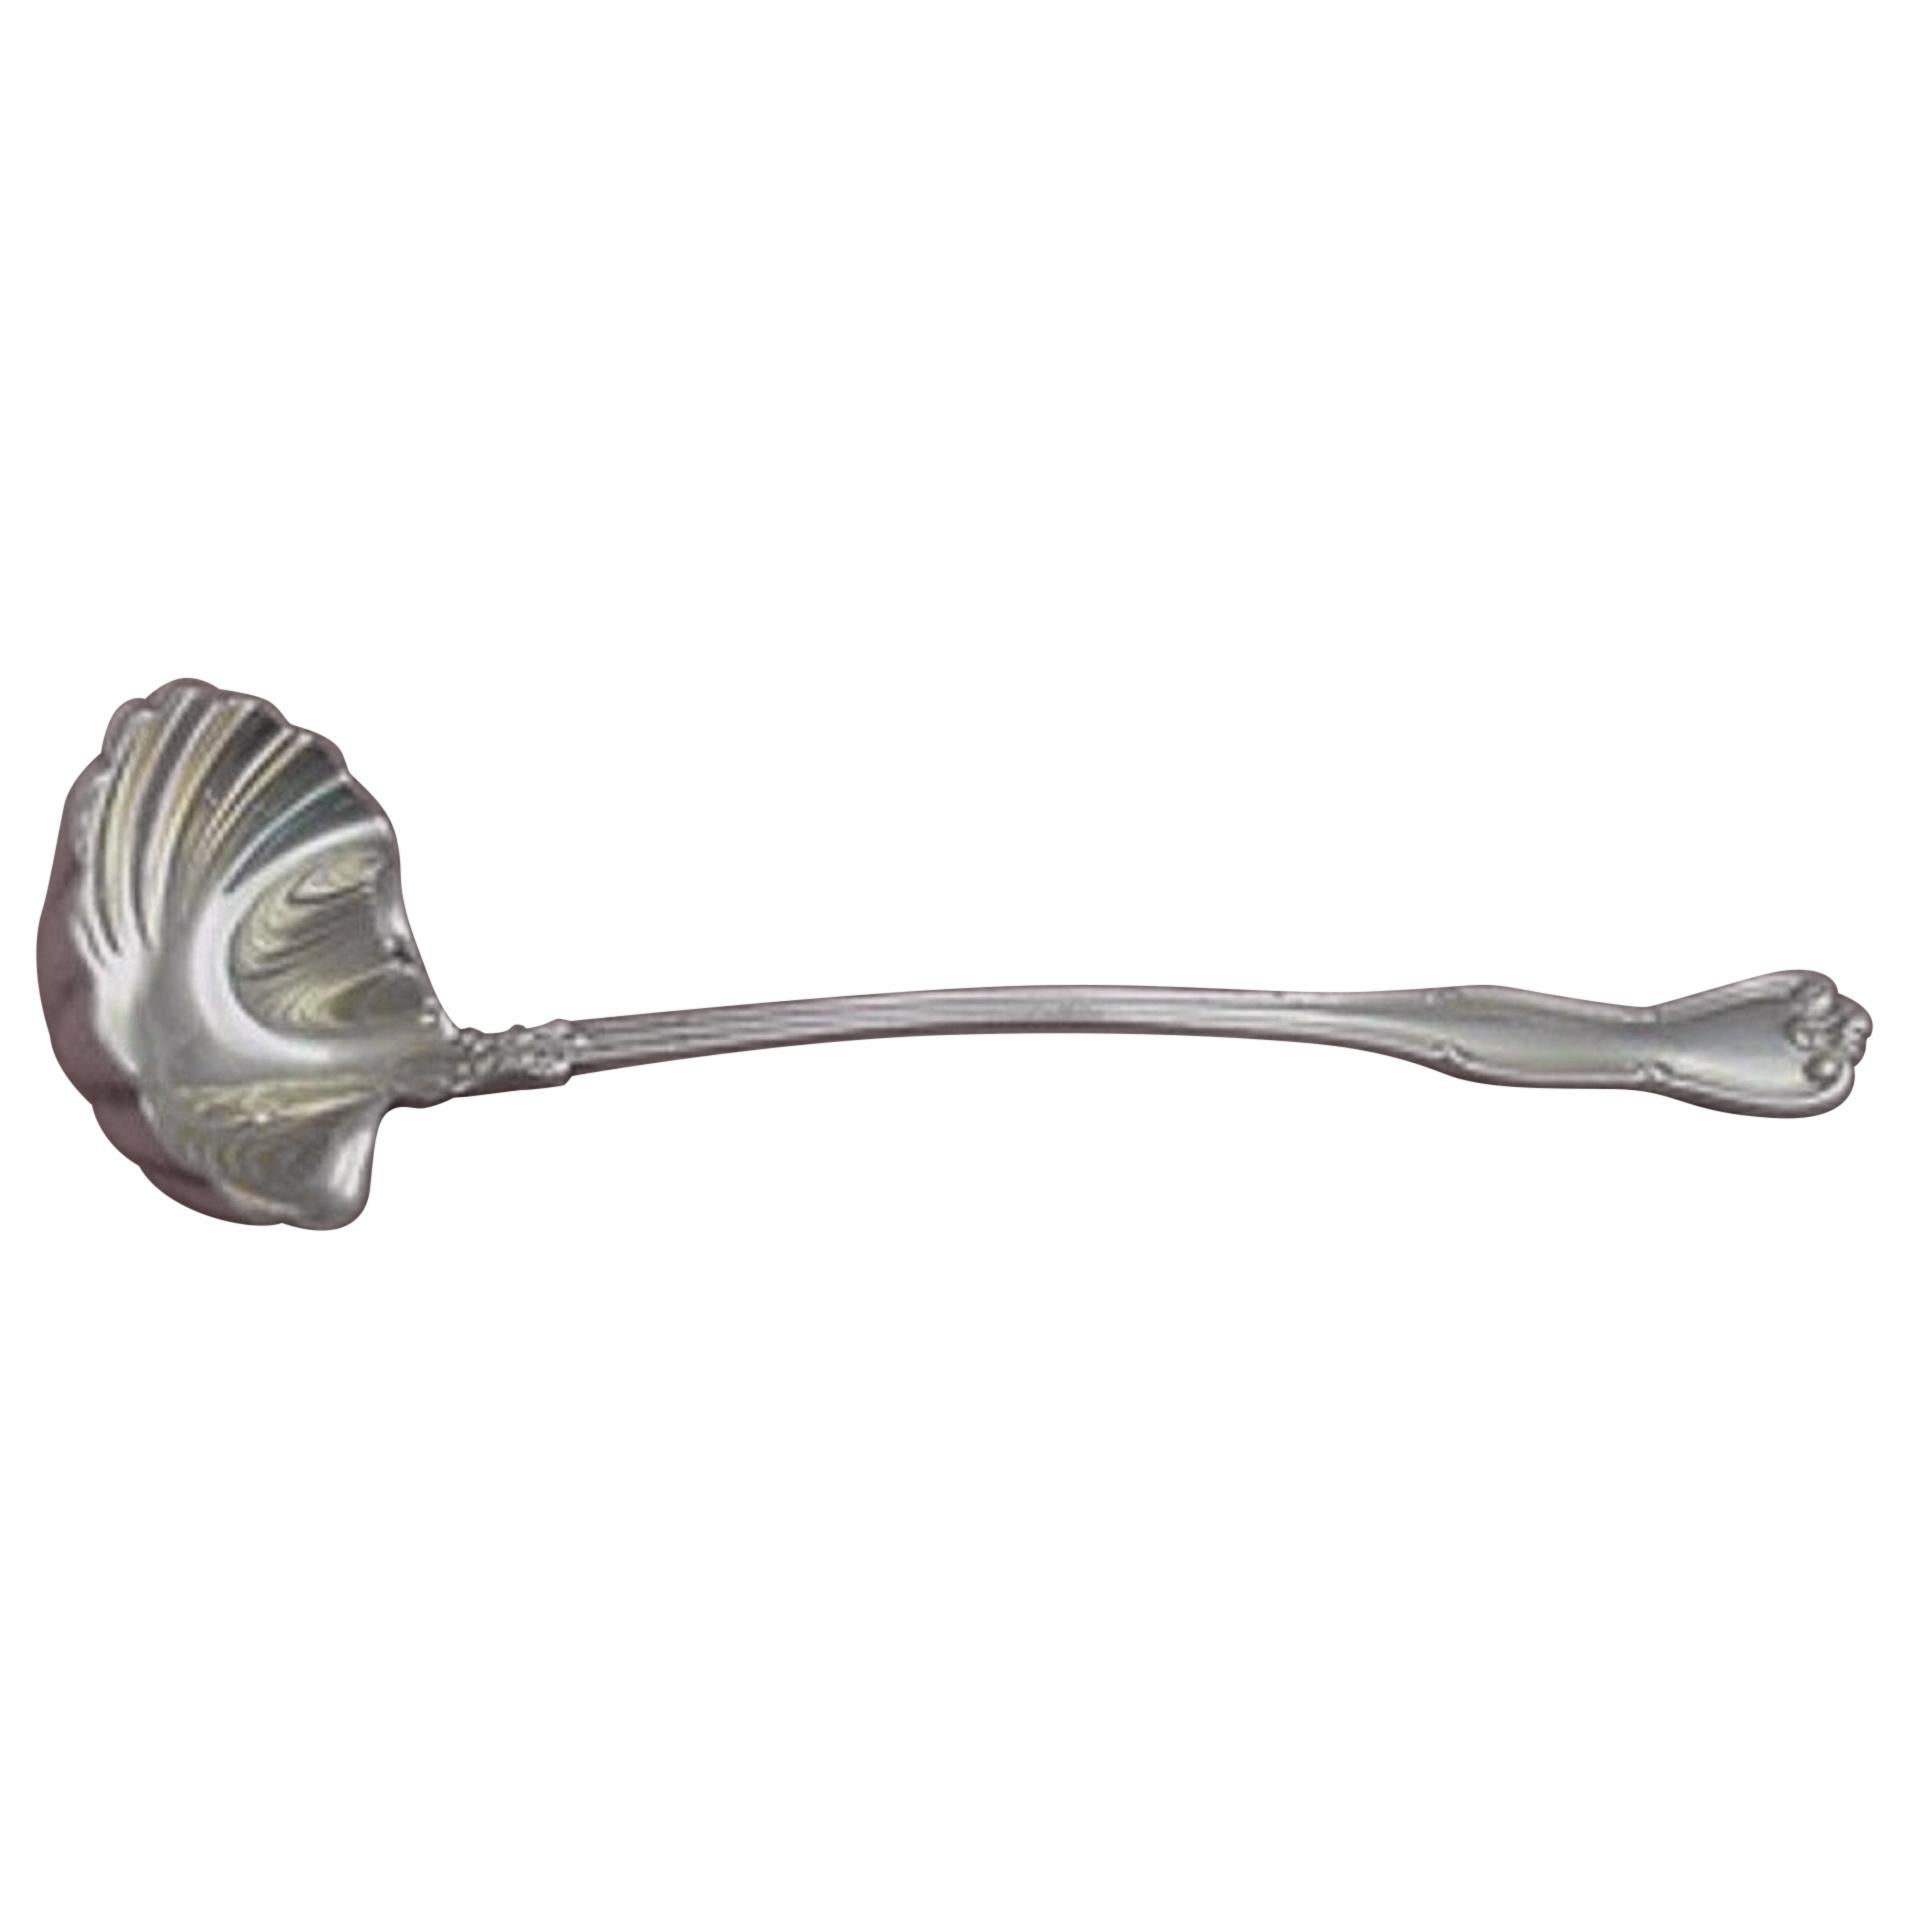 Provence by Tiffany & Co. Sterling Silver Sauce Ladle Serving